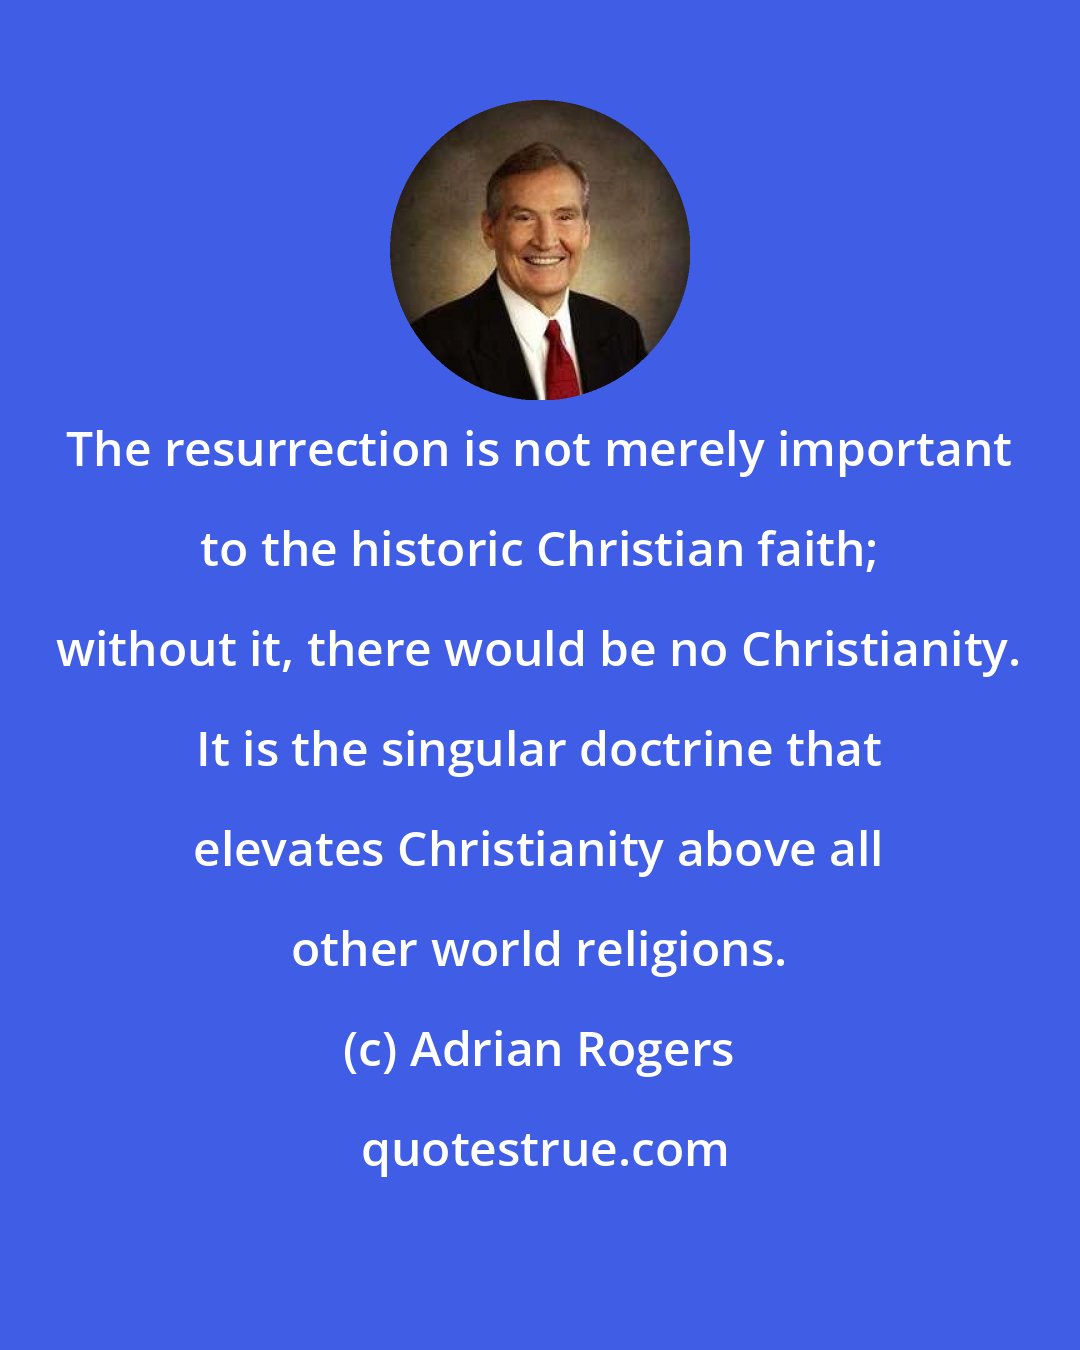 Adrian Rogers: The resurrection is not merely important to the historic Christian faith; without it, there would be no Christianity. It is the singular doctrine that elevates Christianity above all other world religions.